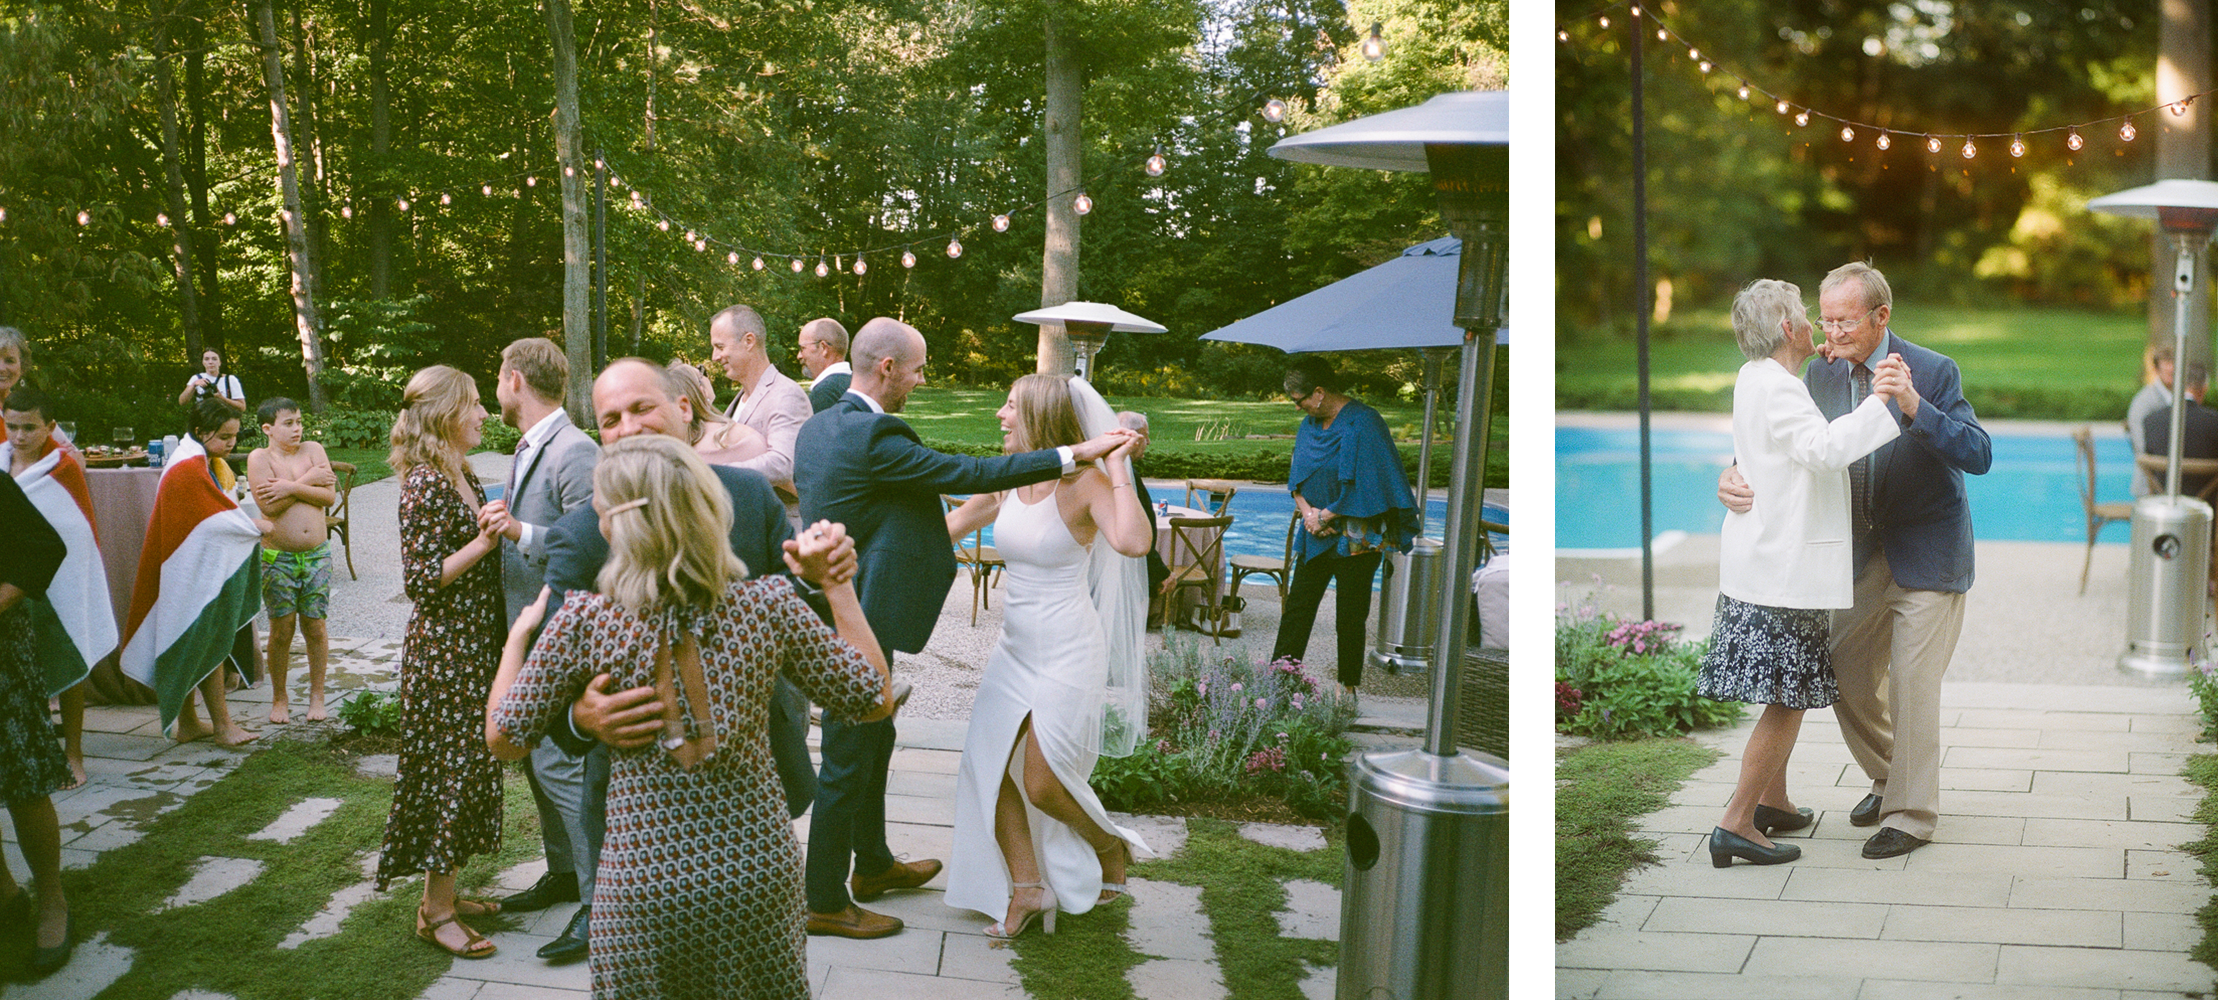 Backyard-Elopement-on-Film-Analog-Pool-Party-111.PNG